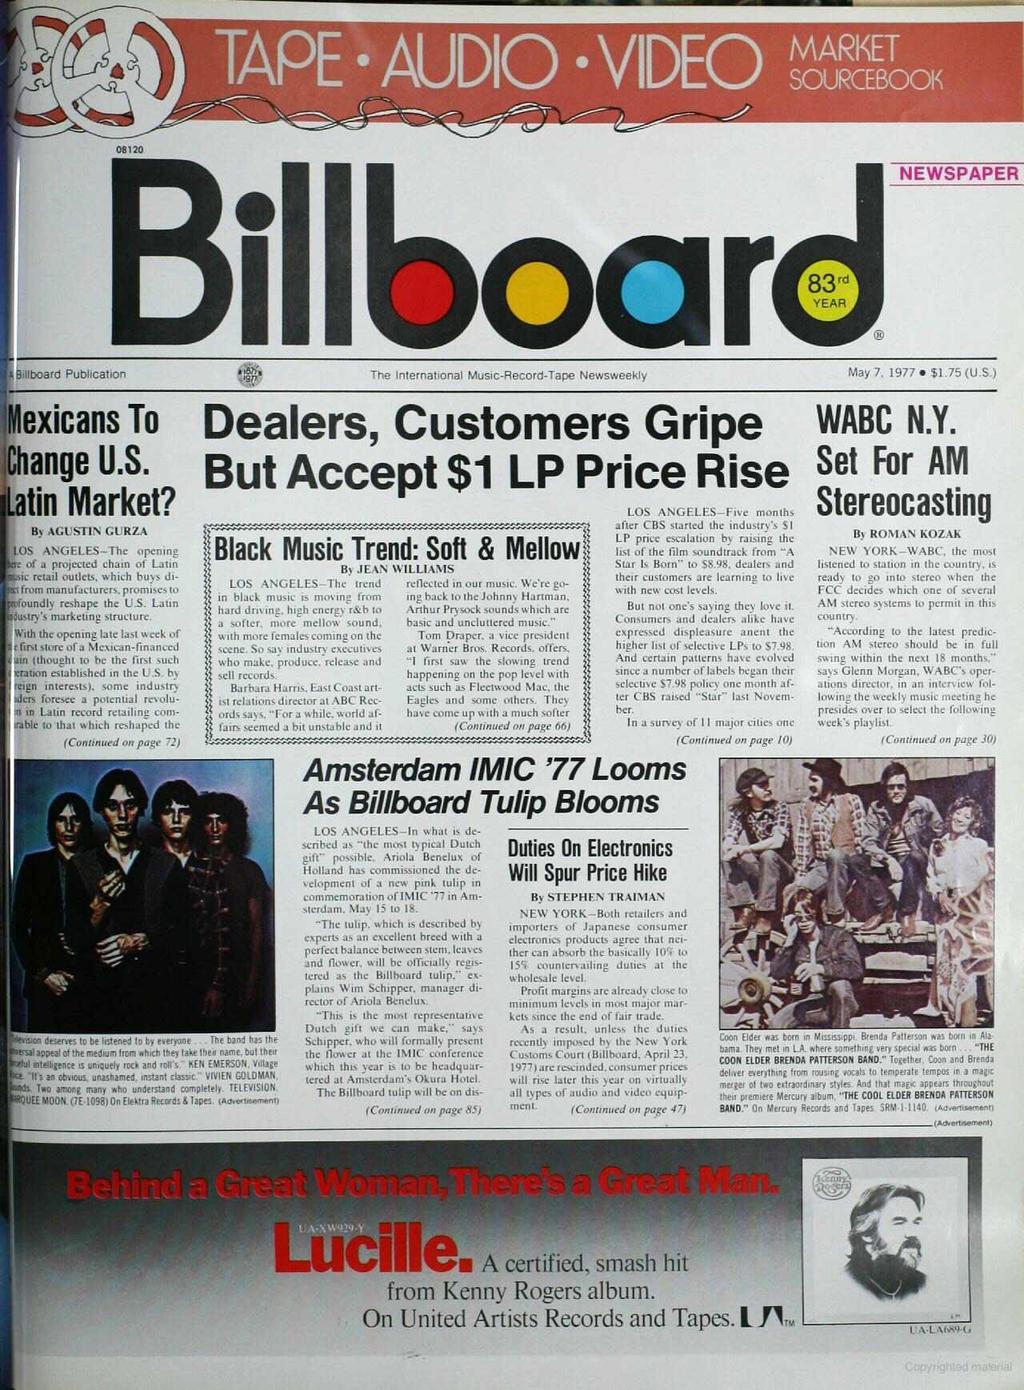 E AUDIOS VIDEO SOÚRCEBOOIt O820 NEWSPAPER Billboard Publication!! The International Music- Record -Tape Newsweekly May 7. 977 $.75 (U.S.) 'Mexicans To Change U.S. afin Market?